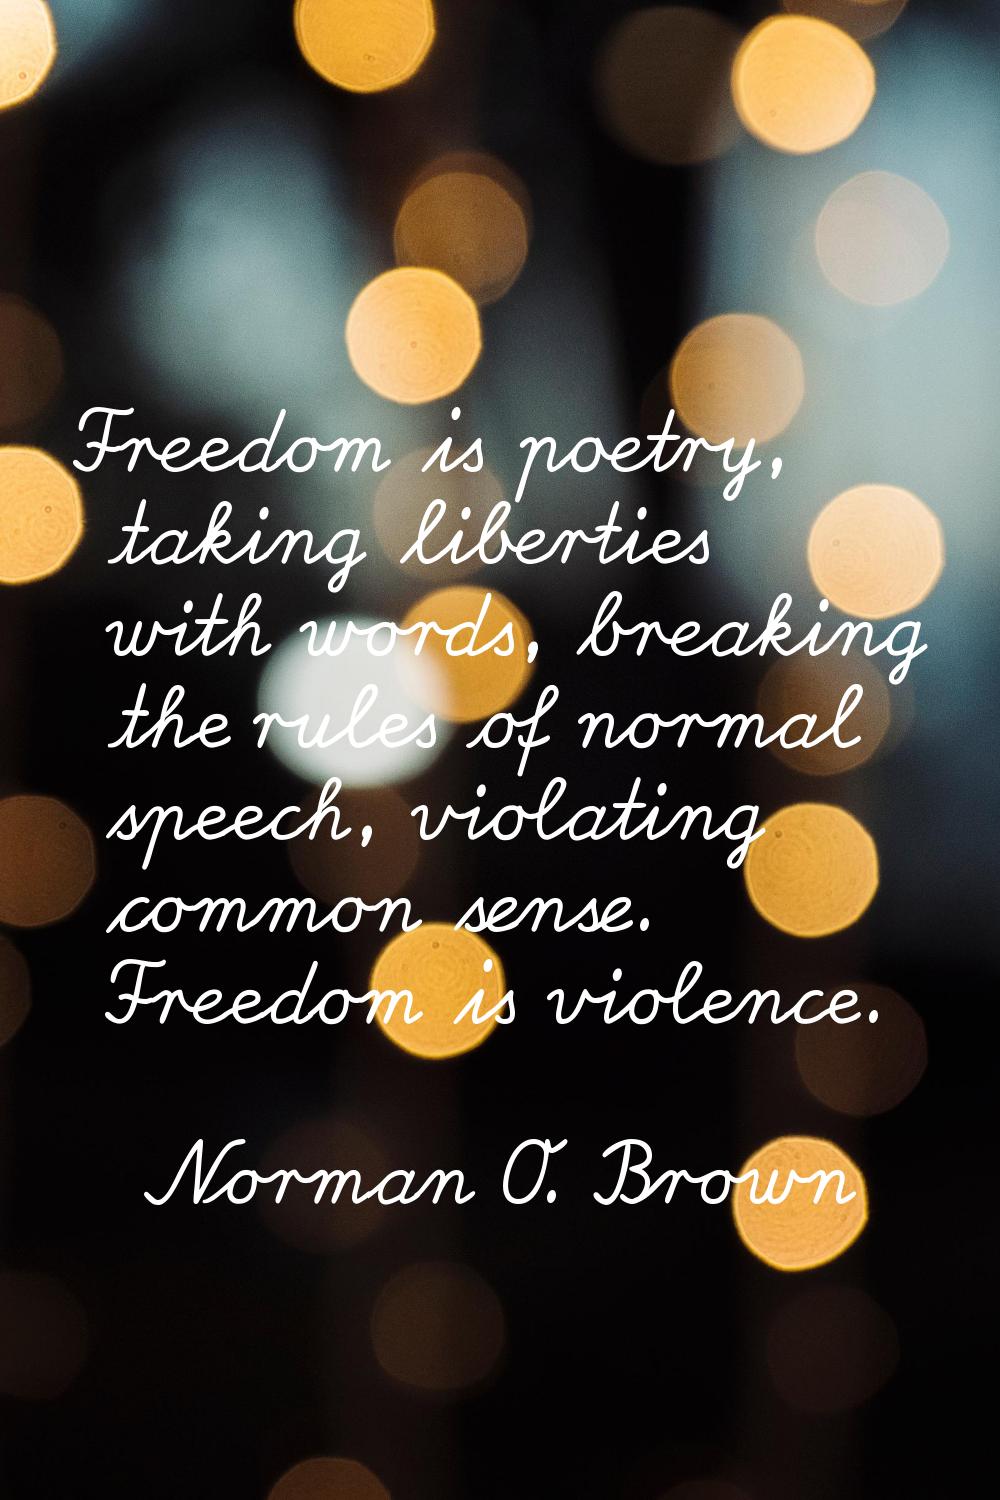 Freedom is poetry, taking liberties with words, breaking the rules of normal speech, violating comm